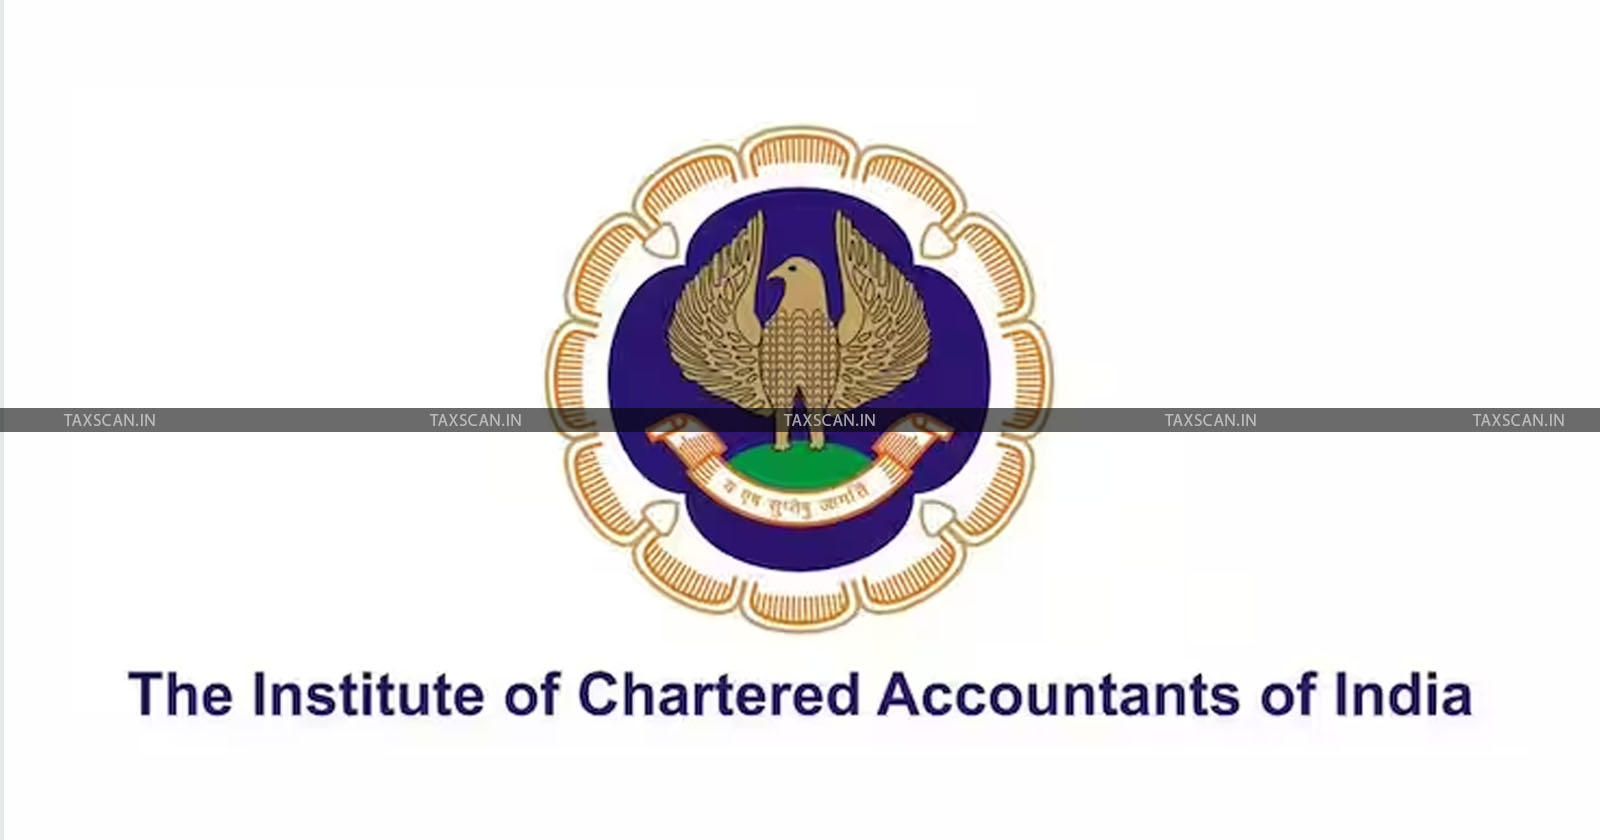 ICAI - Chartered Accountant - ICAI register removal - Institute of Chartered Accountants of India - ICAI Council - taxscan